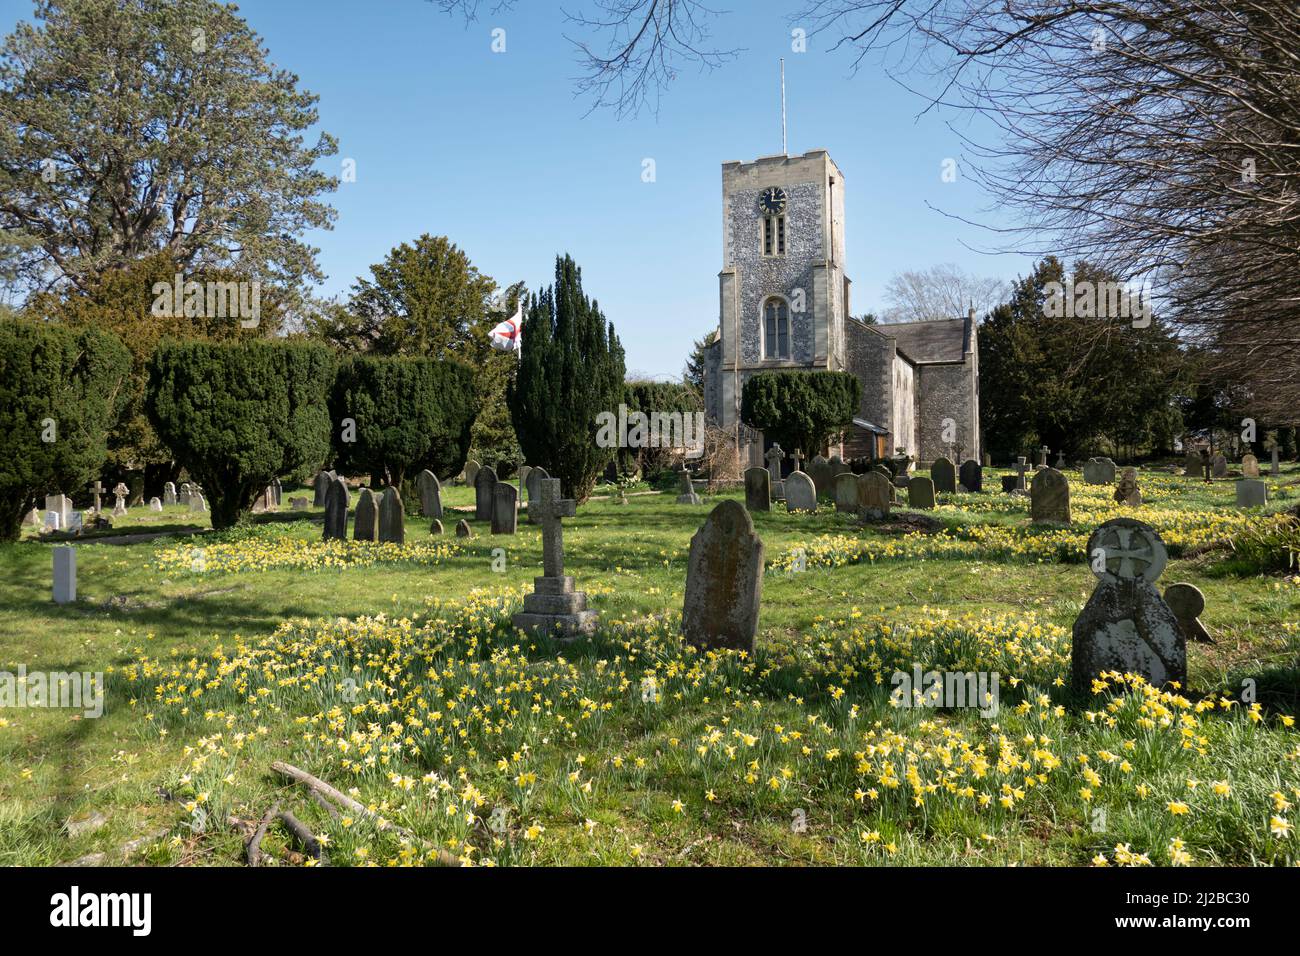 Burghclere church in spring with daffodils, Burghclere, Hampshire, England, United Kingdom, Europe Stock Photo